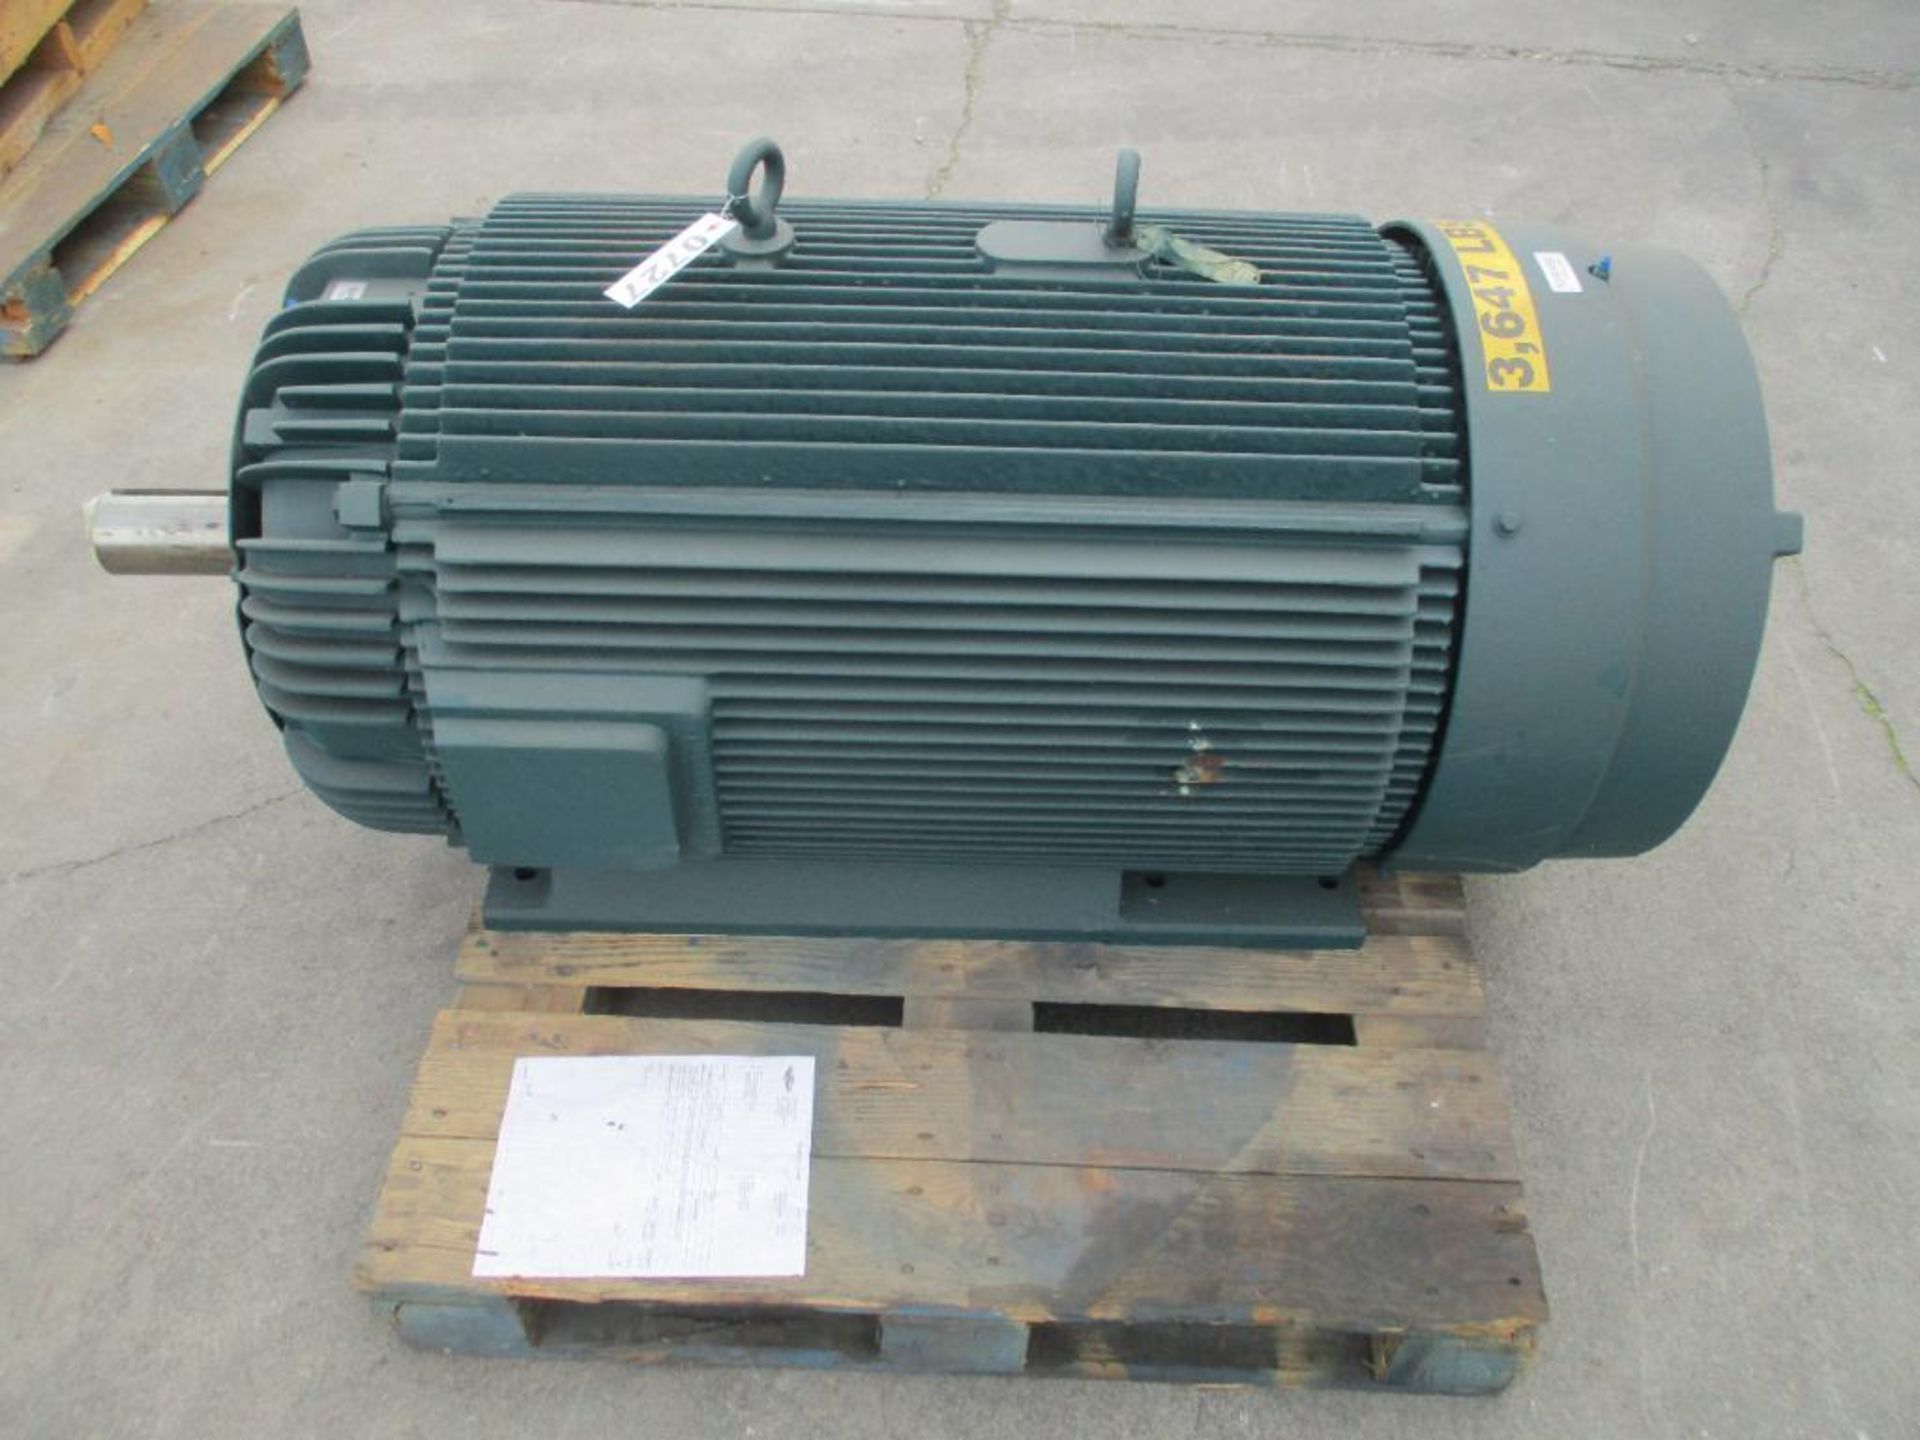 RELIANCE ELECTRIC 3 PHASE 400HP 1791-2686RPM 449T FRAME A/C MOTOR P/N 6304757 3602# LBS (THIS LOT IS - Image 3 of 5